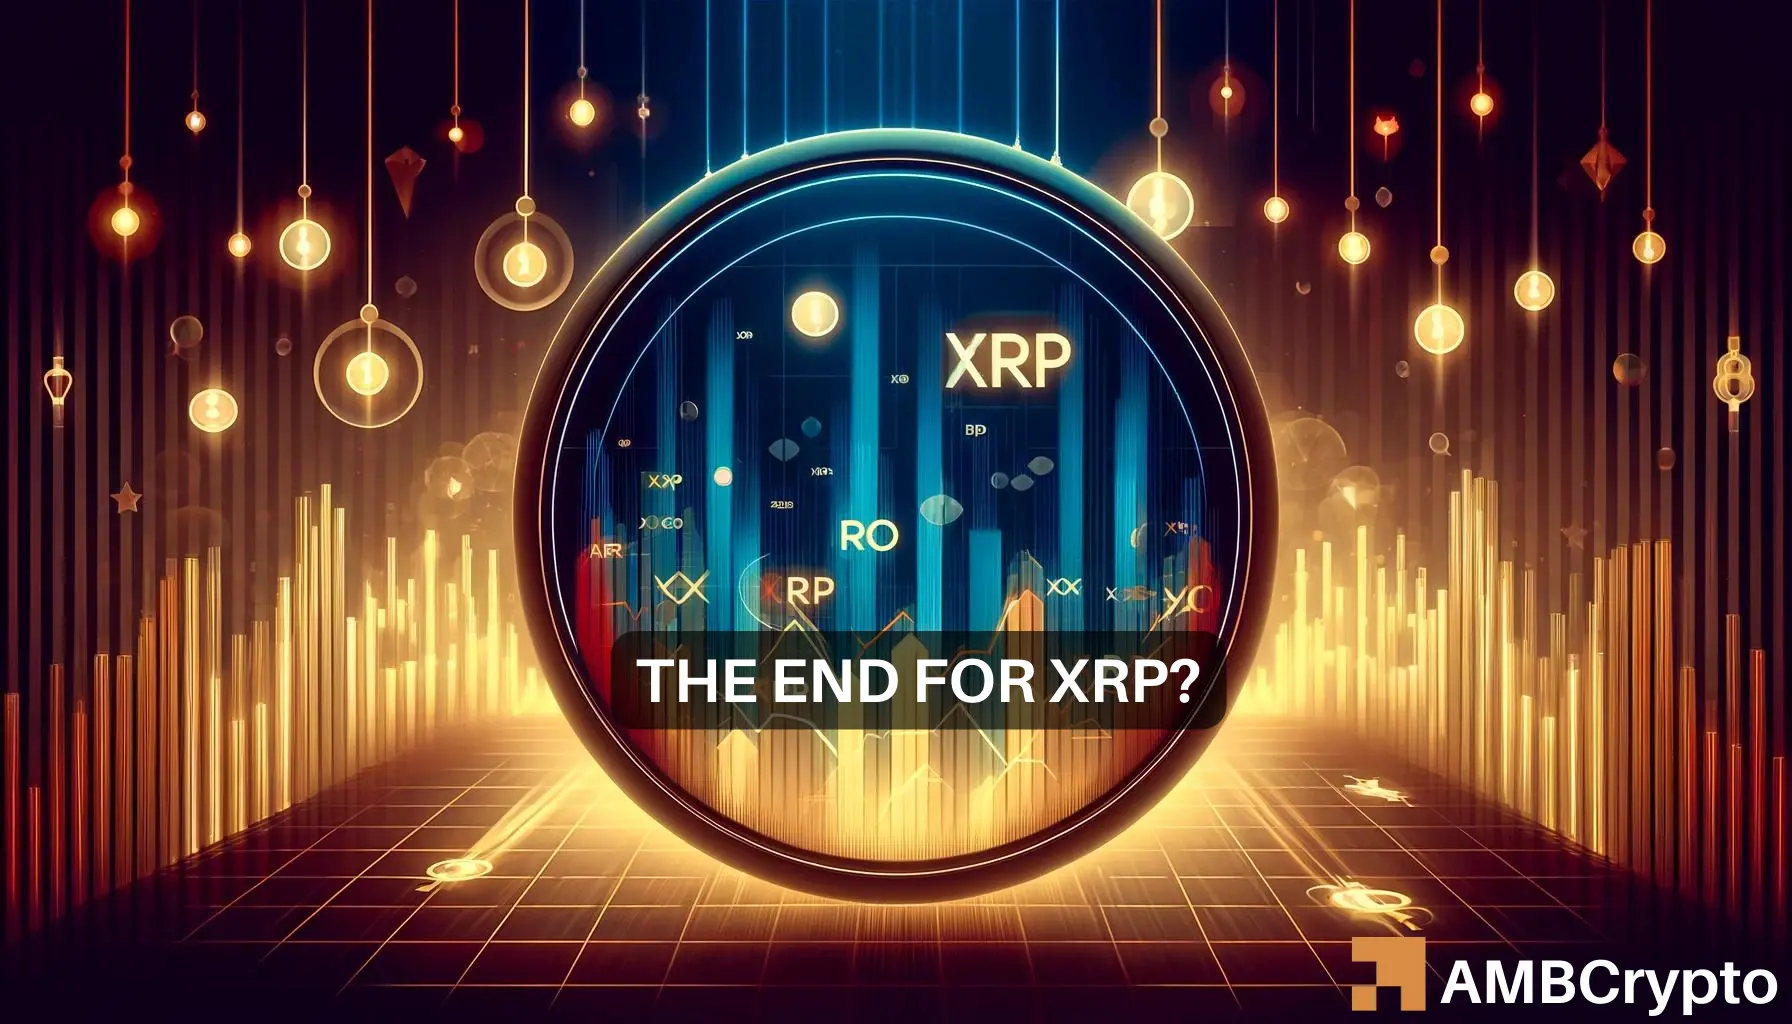 The End for XRP?